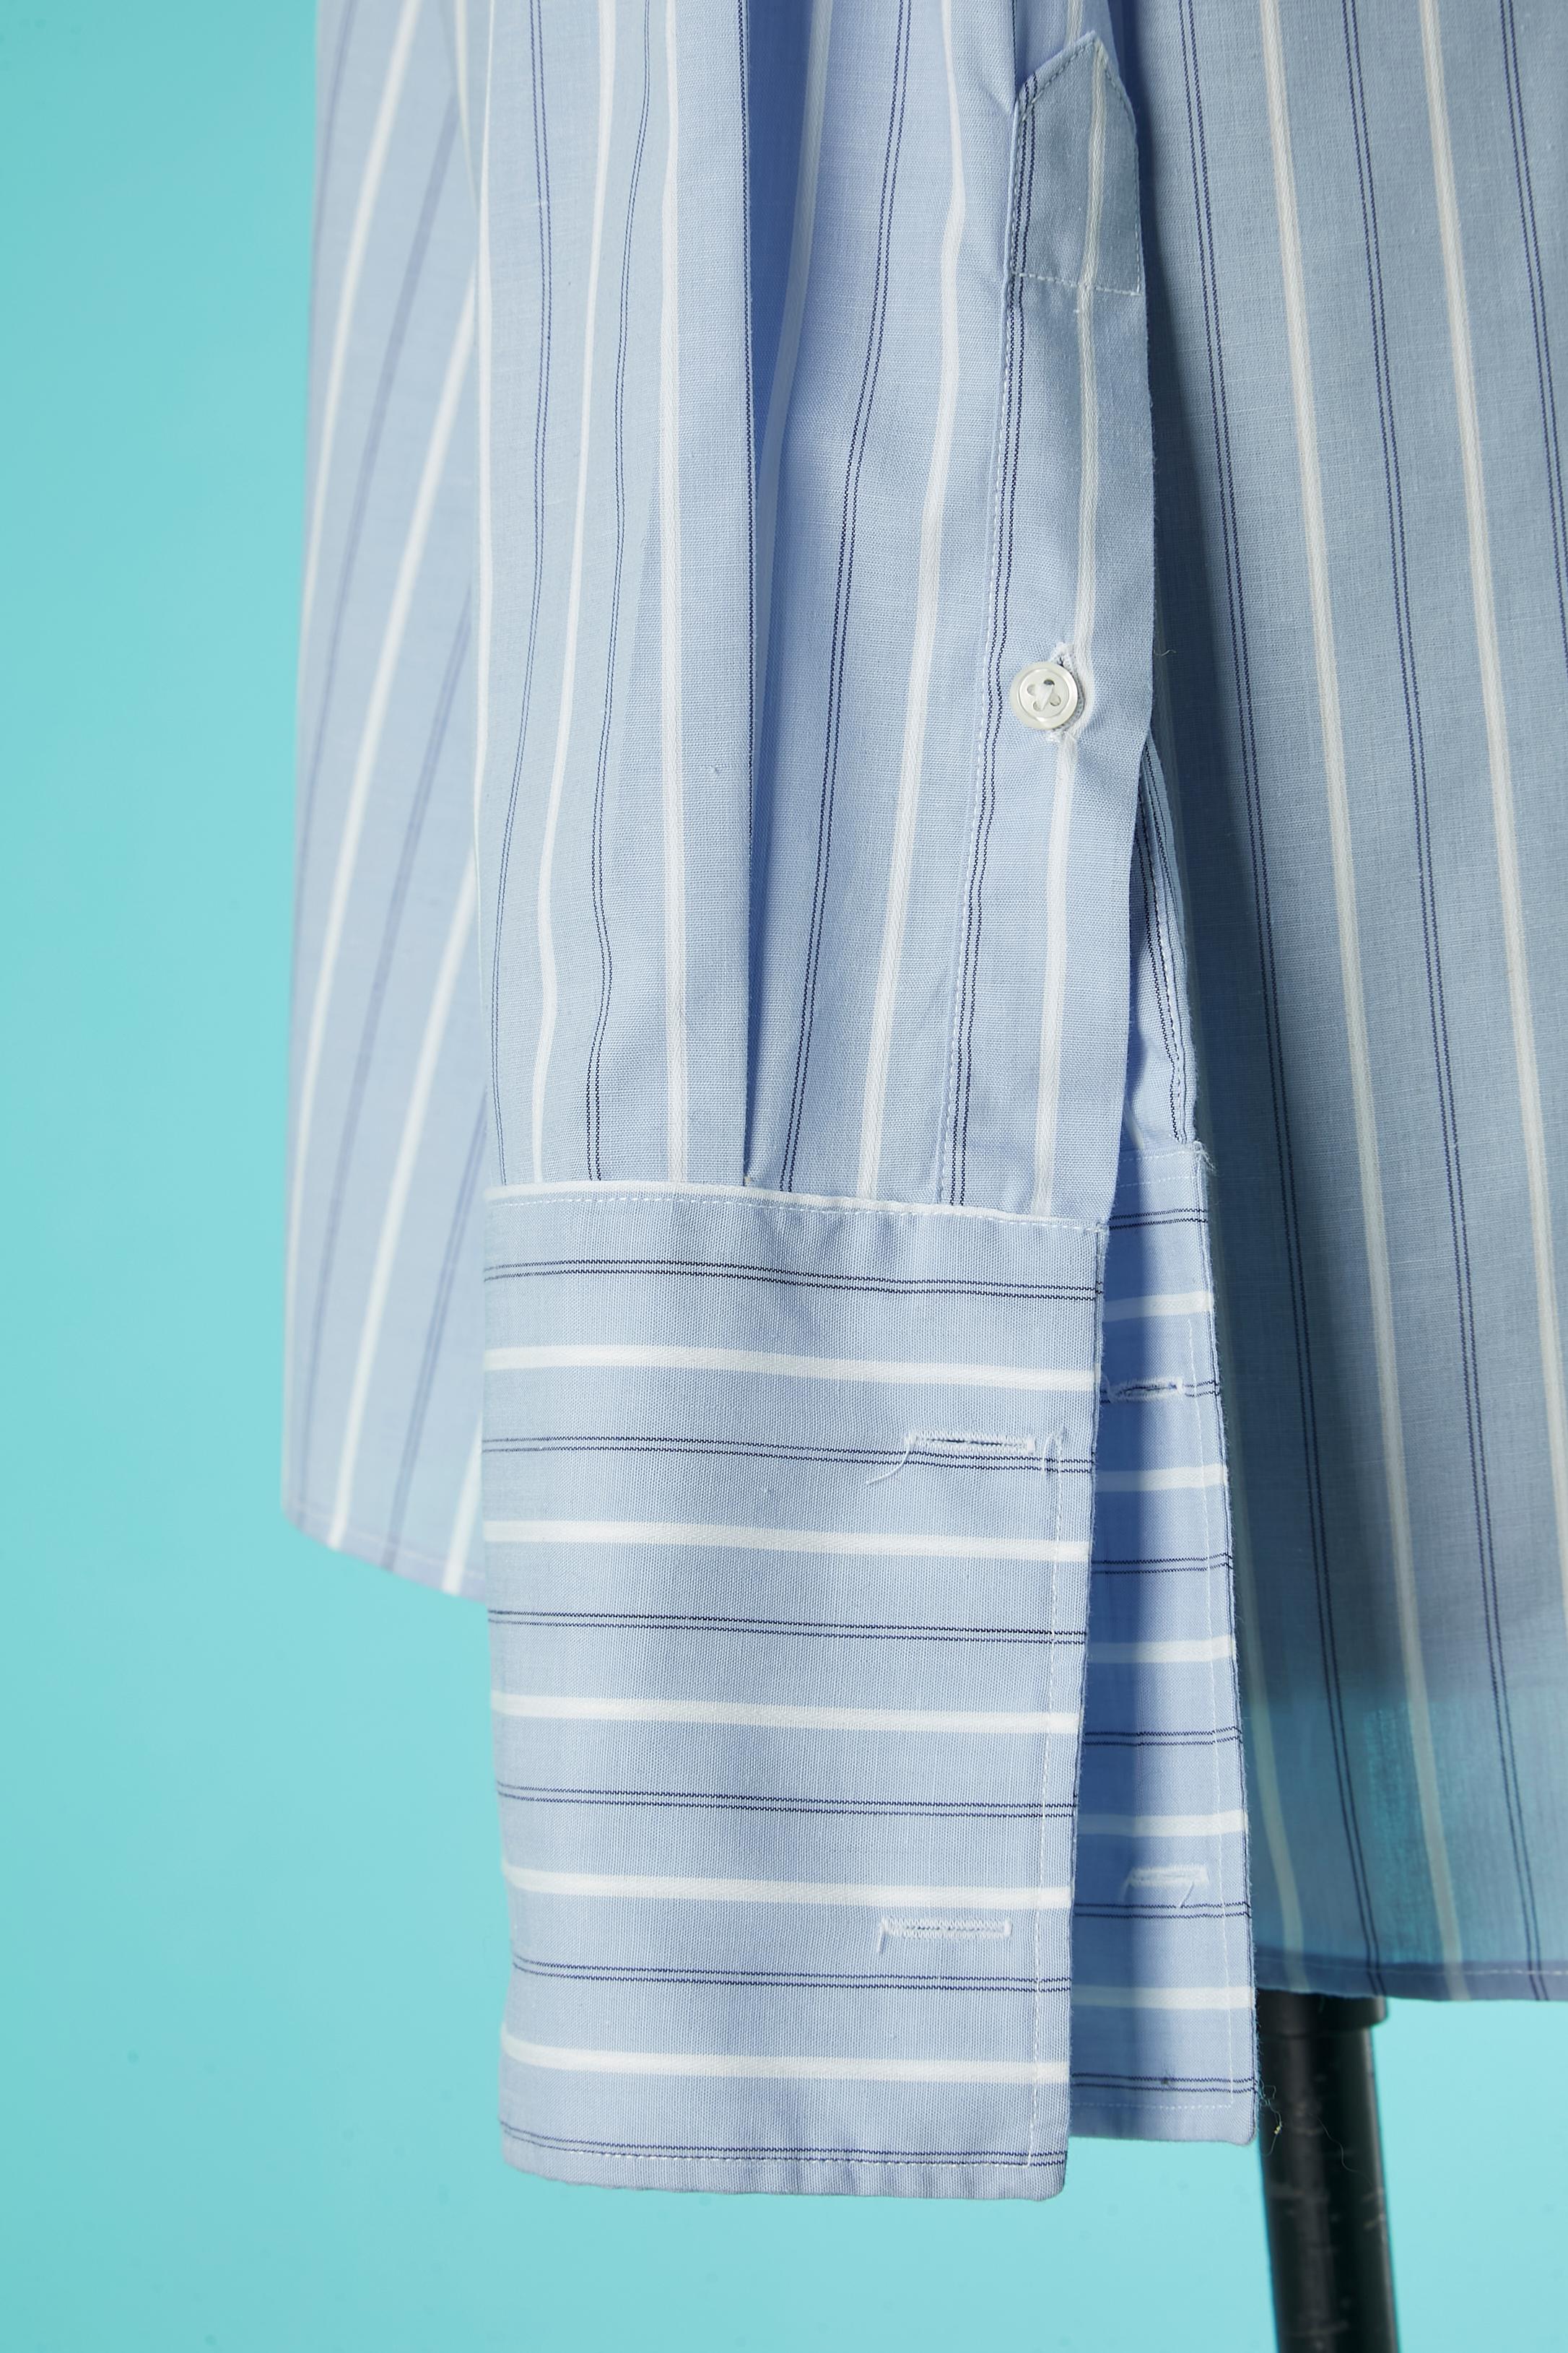 Women's or Men's White and pale blue striped shirt with white collar Christian Dior Monsieur 